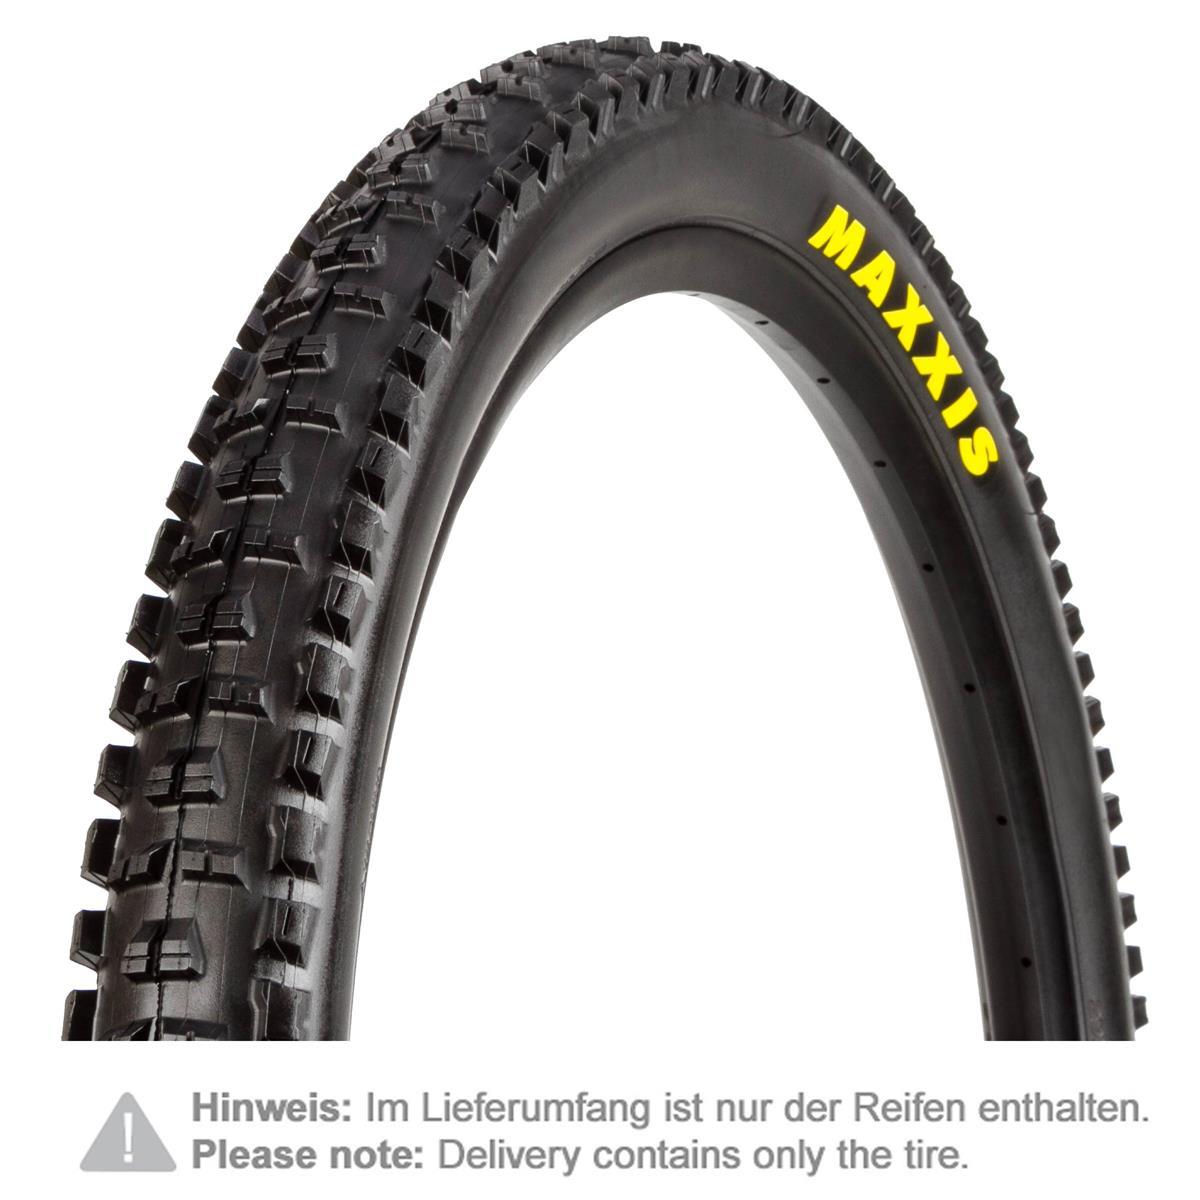 Black for sale online Maxxis High Roller II EXO KV 27.5x2.30 Tubeless Ready Tyre 